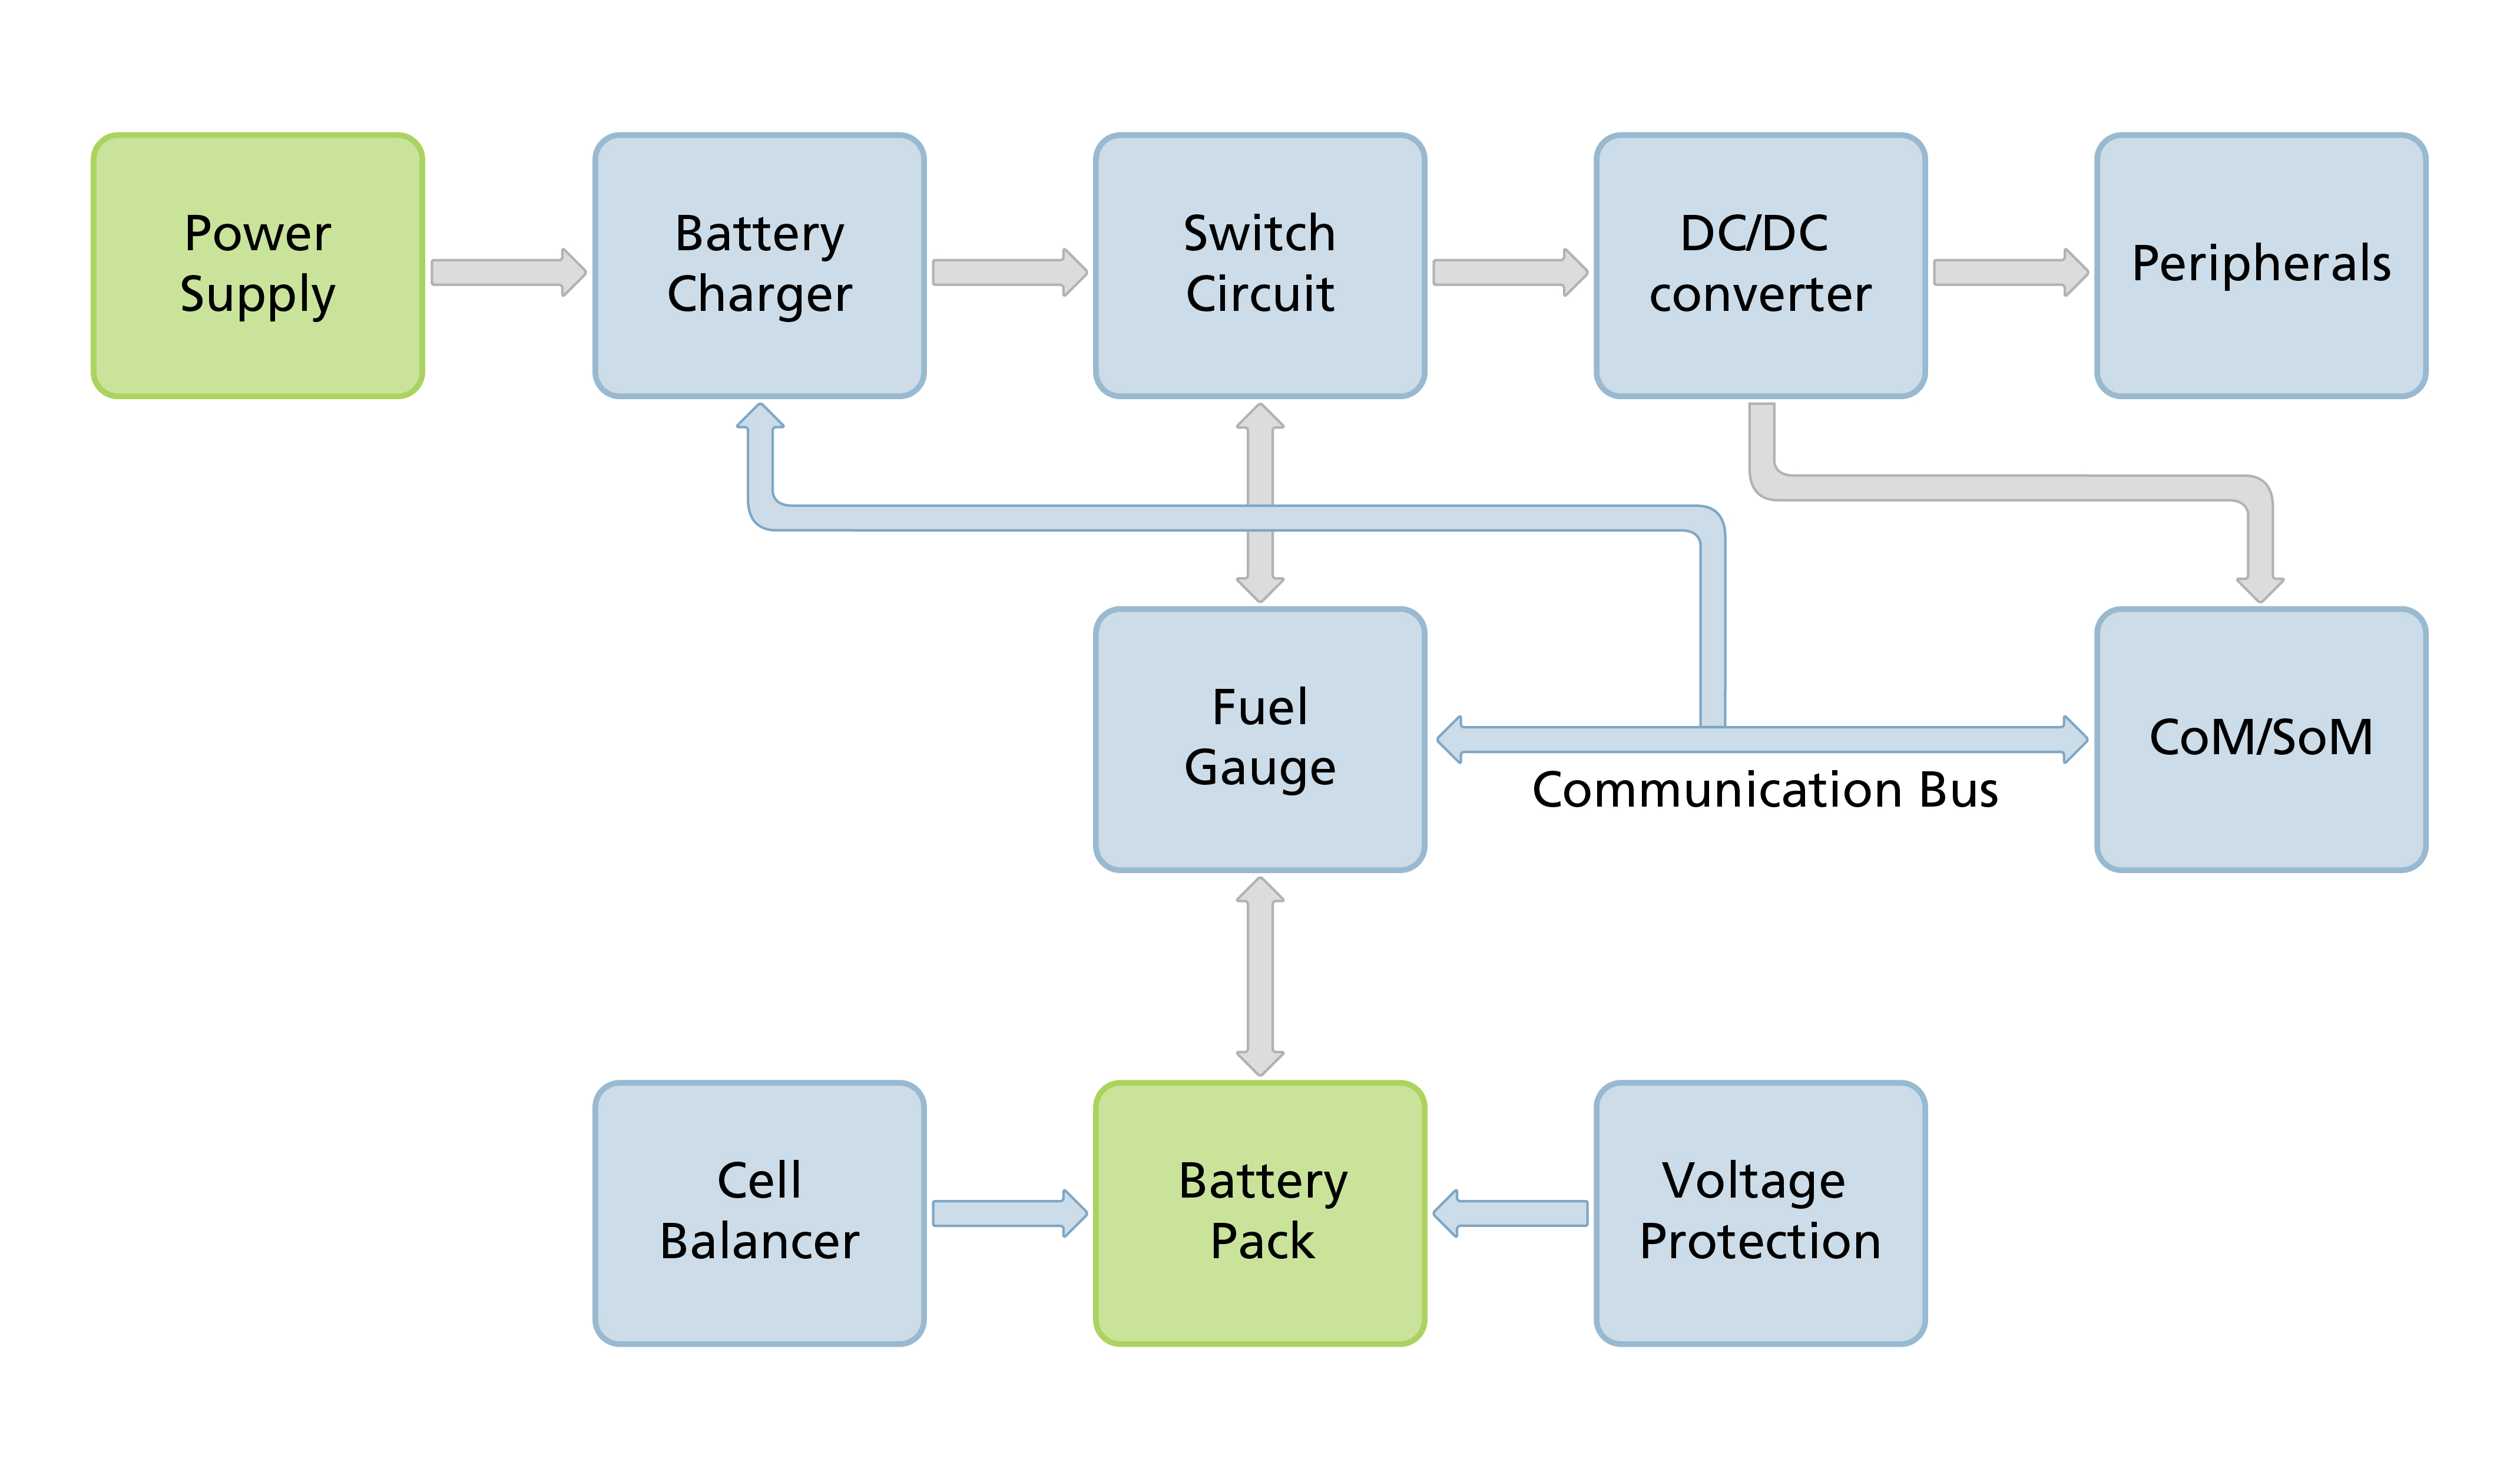 General battery management system overview